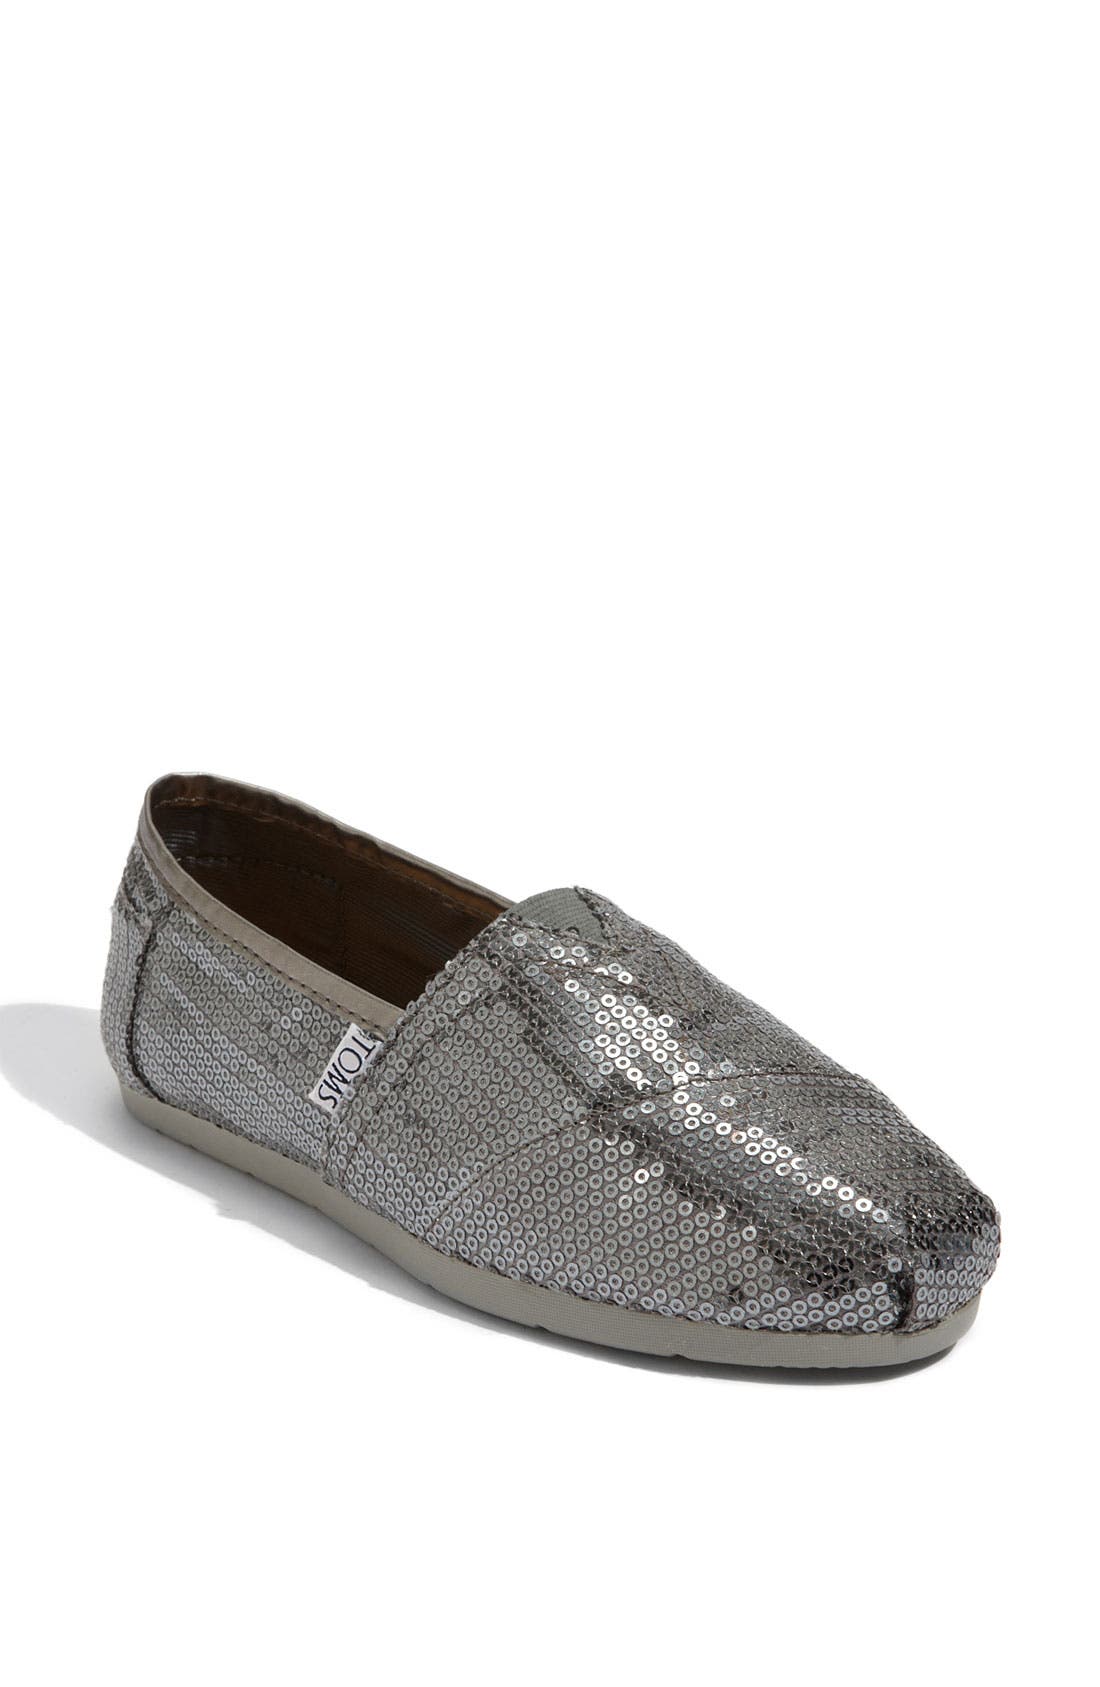 toms shoes arch support